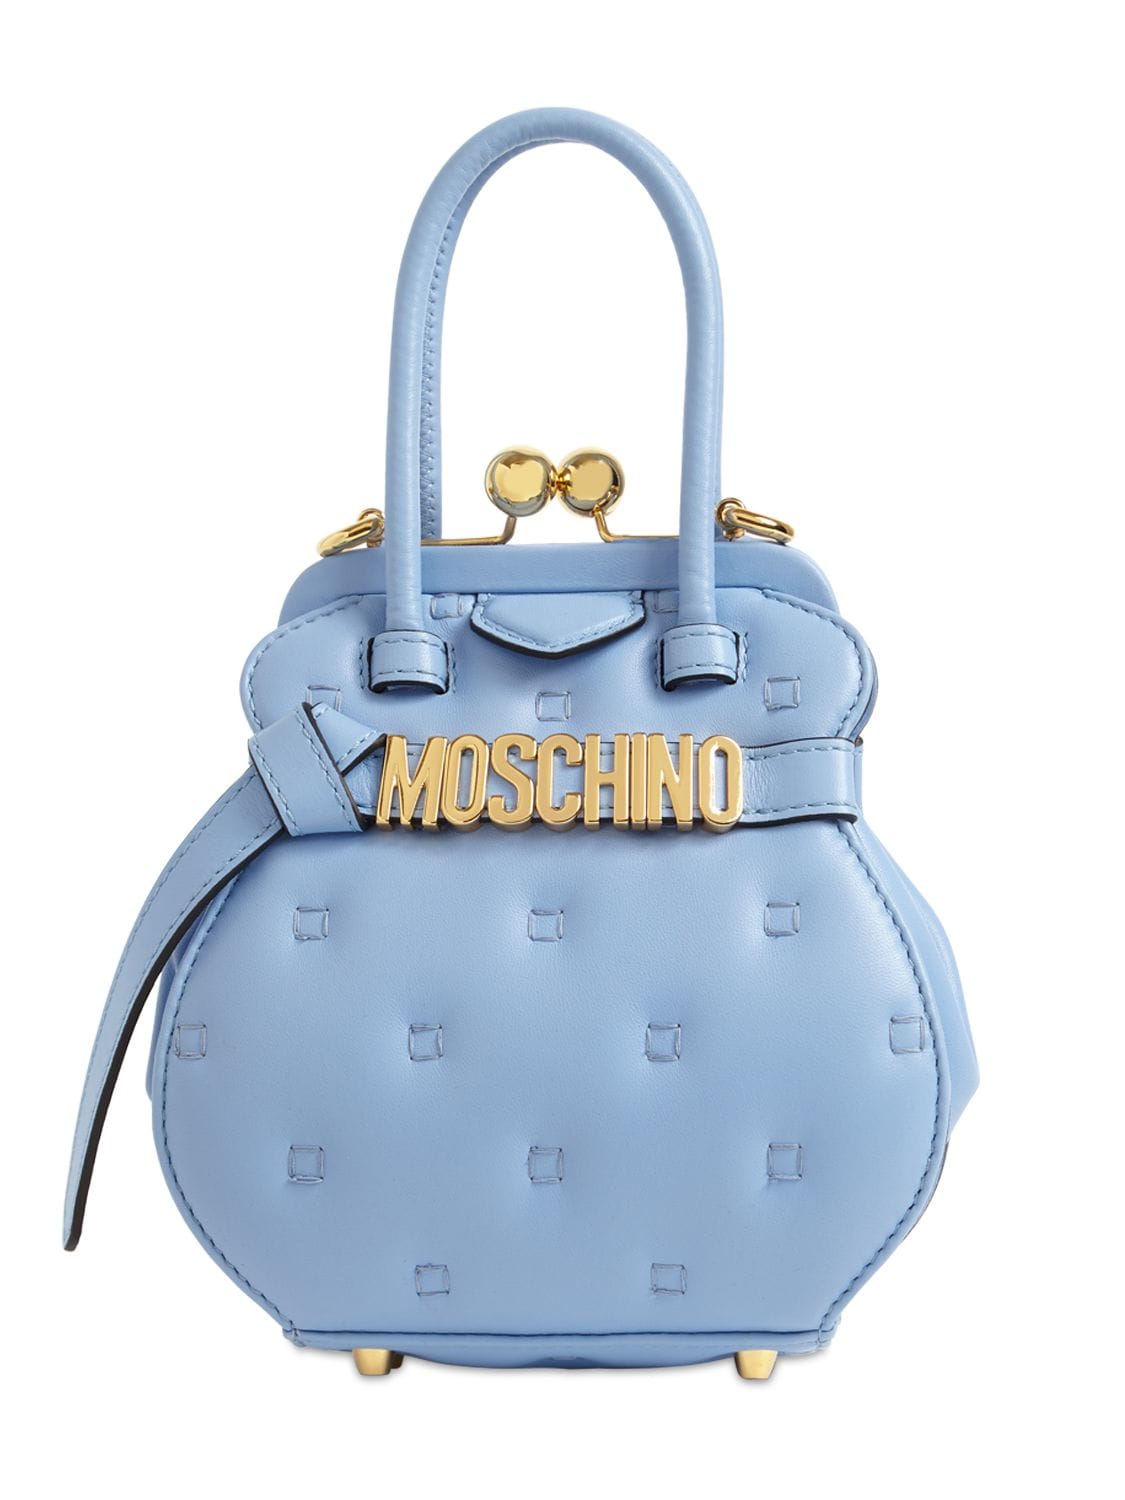 MOSCHINO LETTERING QUILTED LEATHER SHOULDER BAG,73IANQ003-QTEYNJY1